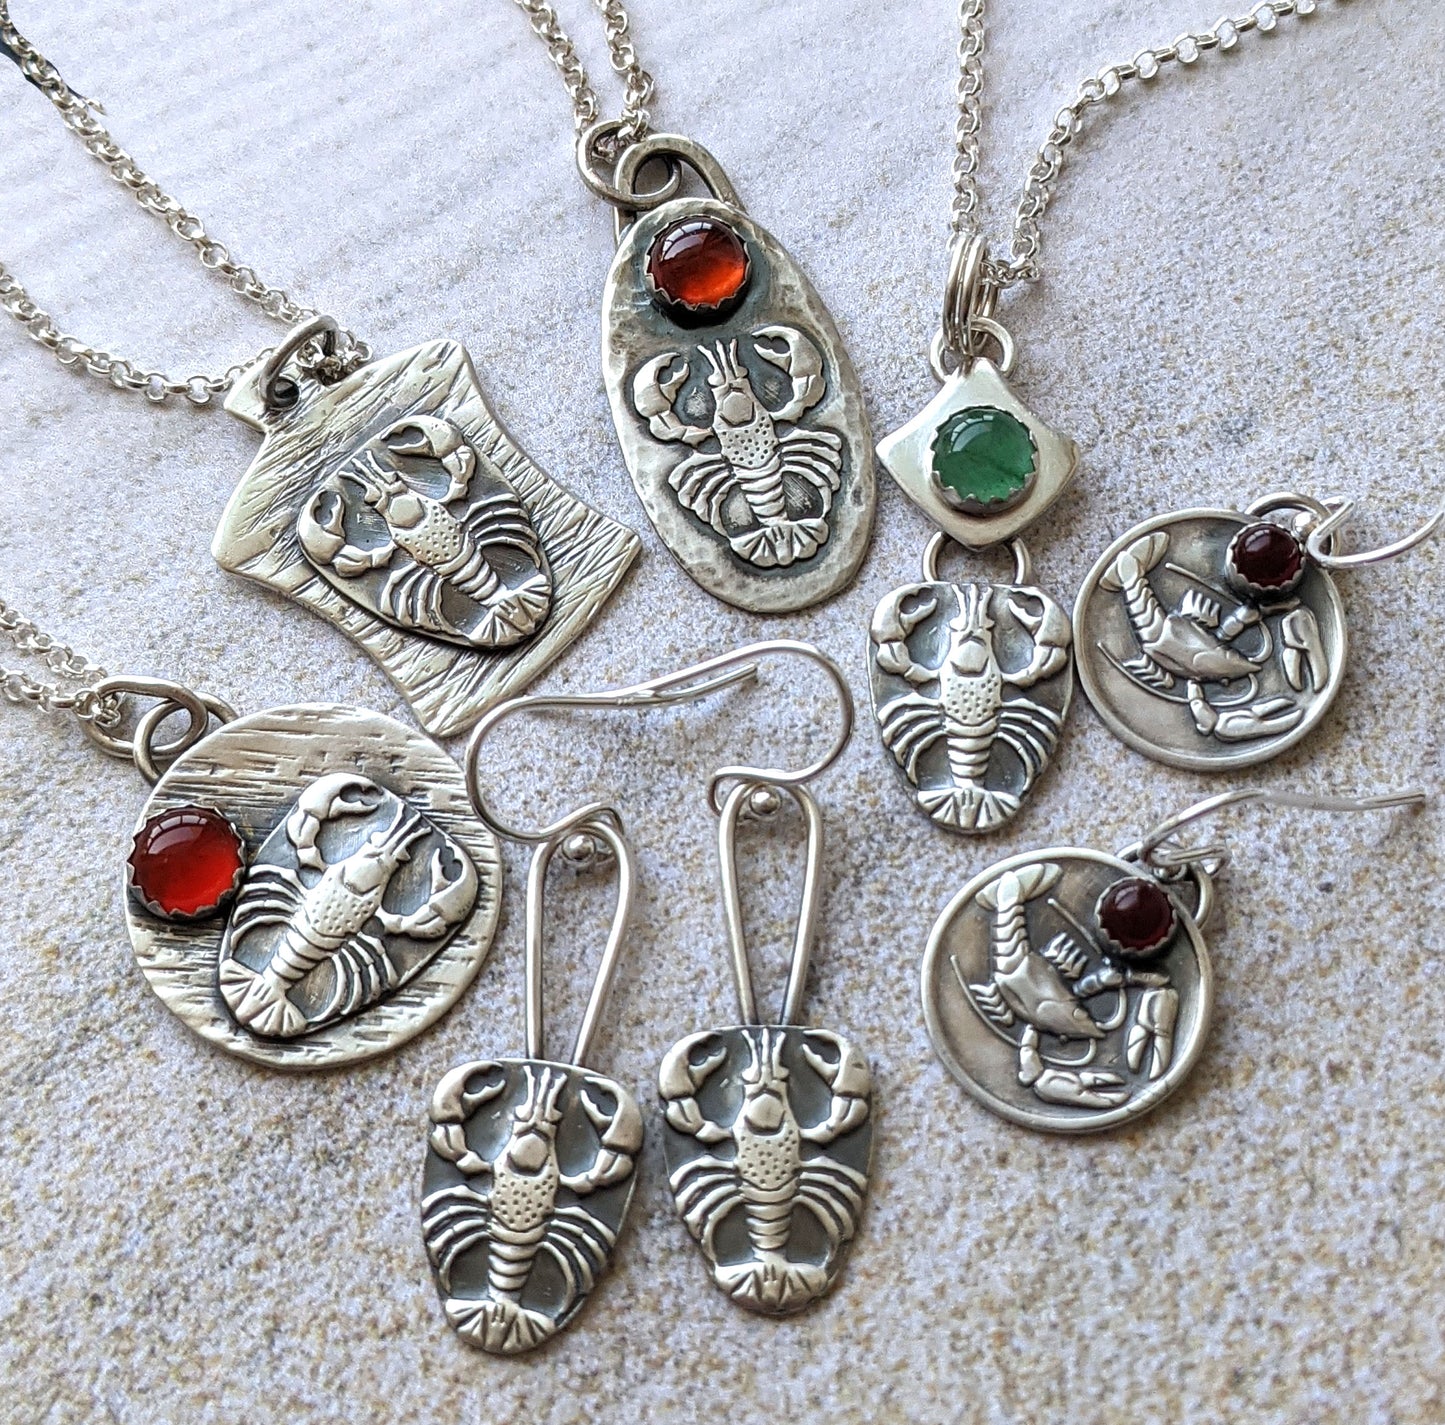 Group of lebster impression jewelry from Hennessey Jewelry. Picture shows four pendants and two pari of earrings.